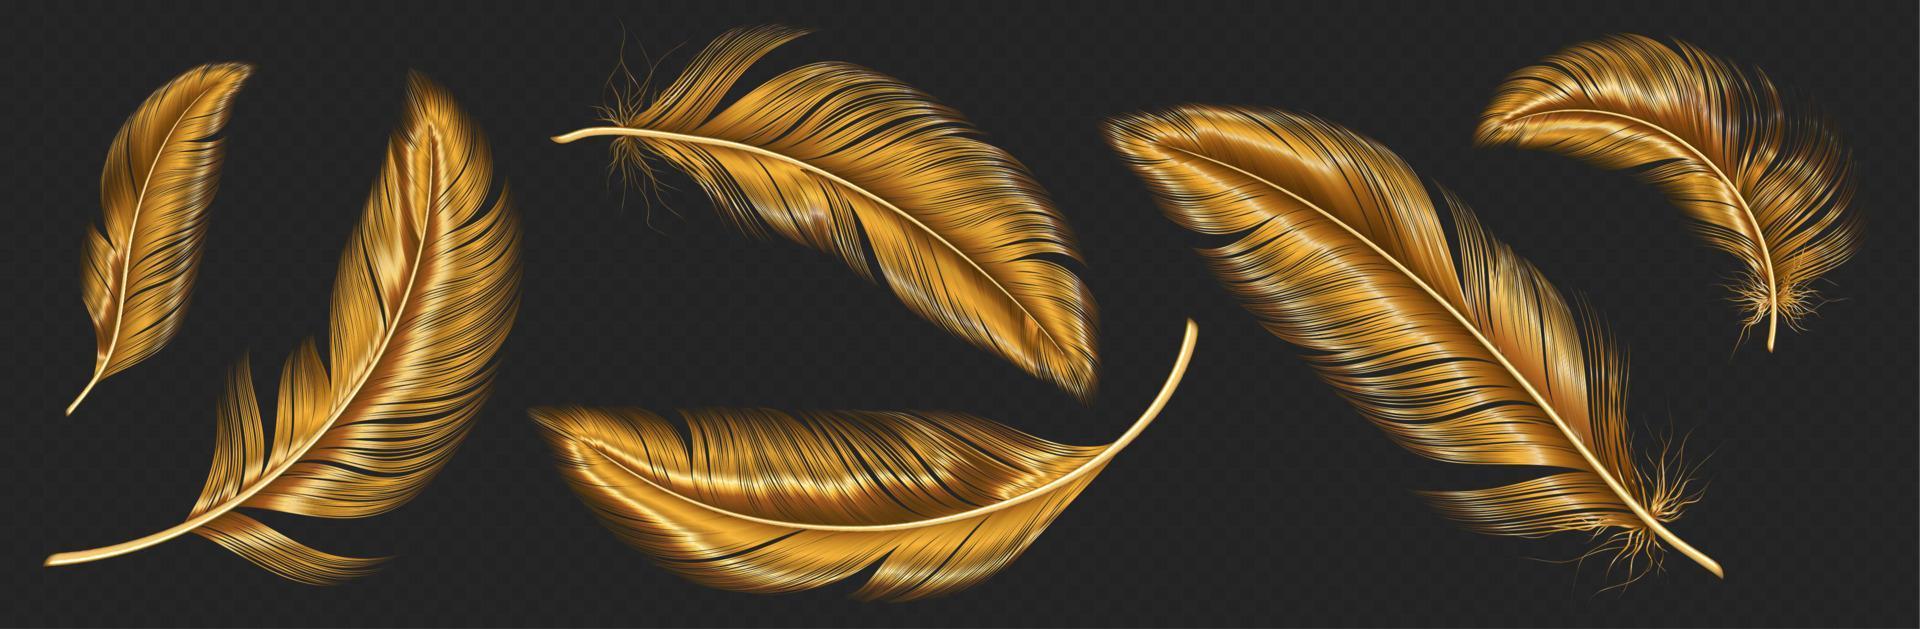 Gold feather Royalty Free Vector Image - VectorStock